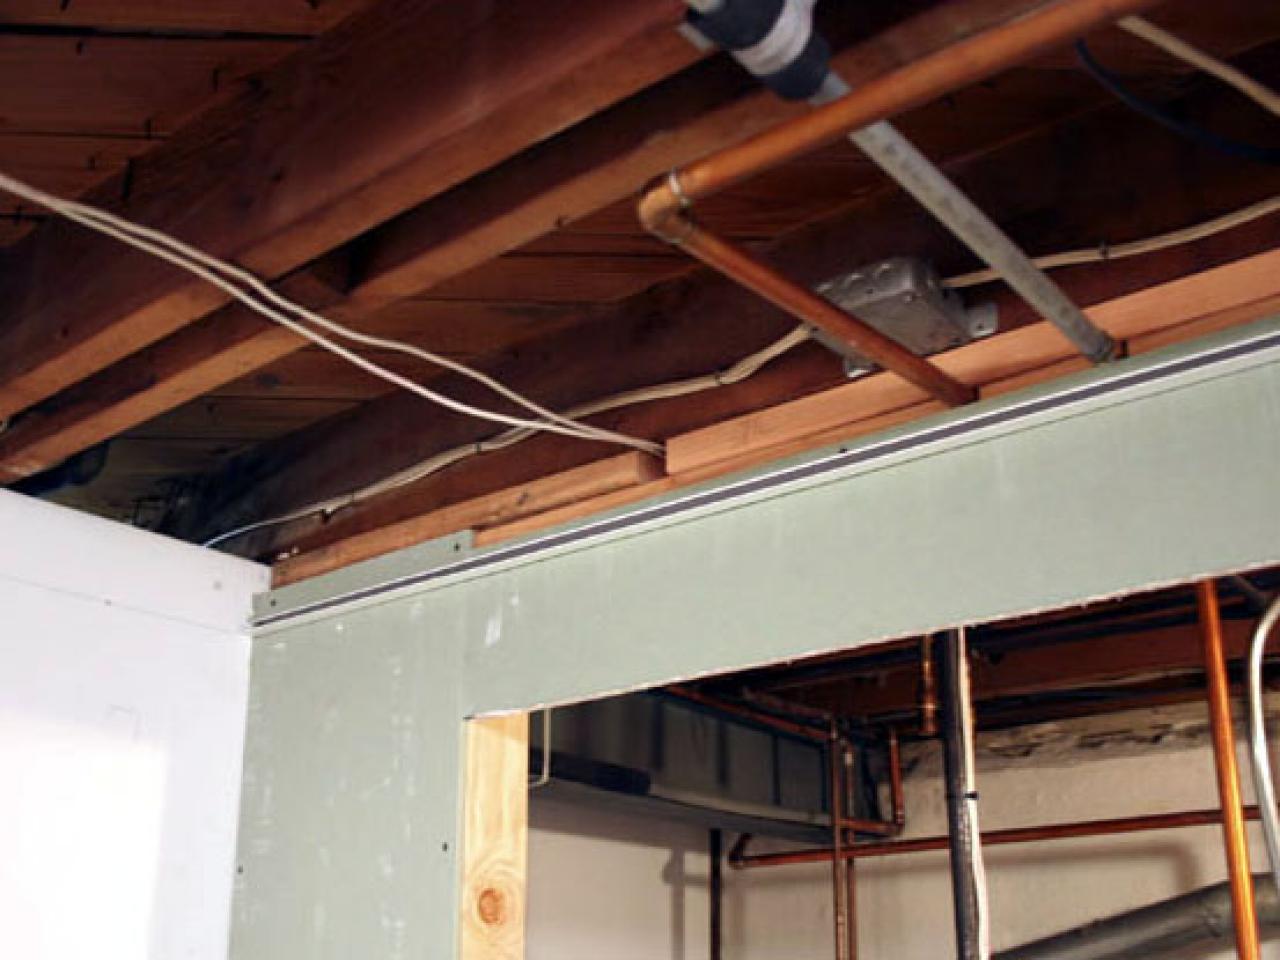 Installing A Drop Ceiling In Basement Laundry - How To Put Up Ceiling Tiles In Basement